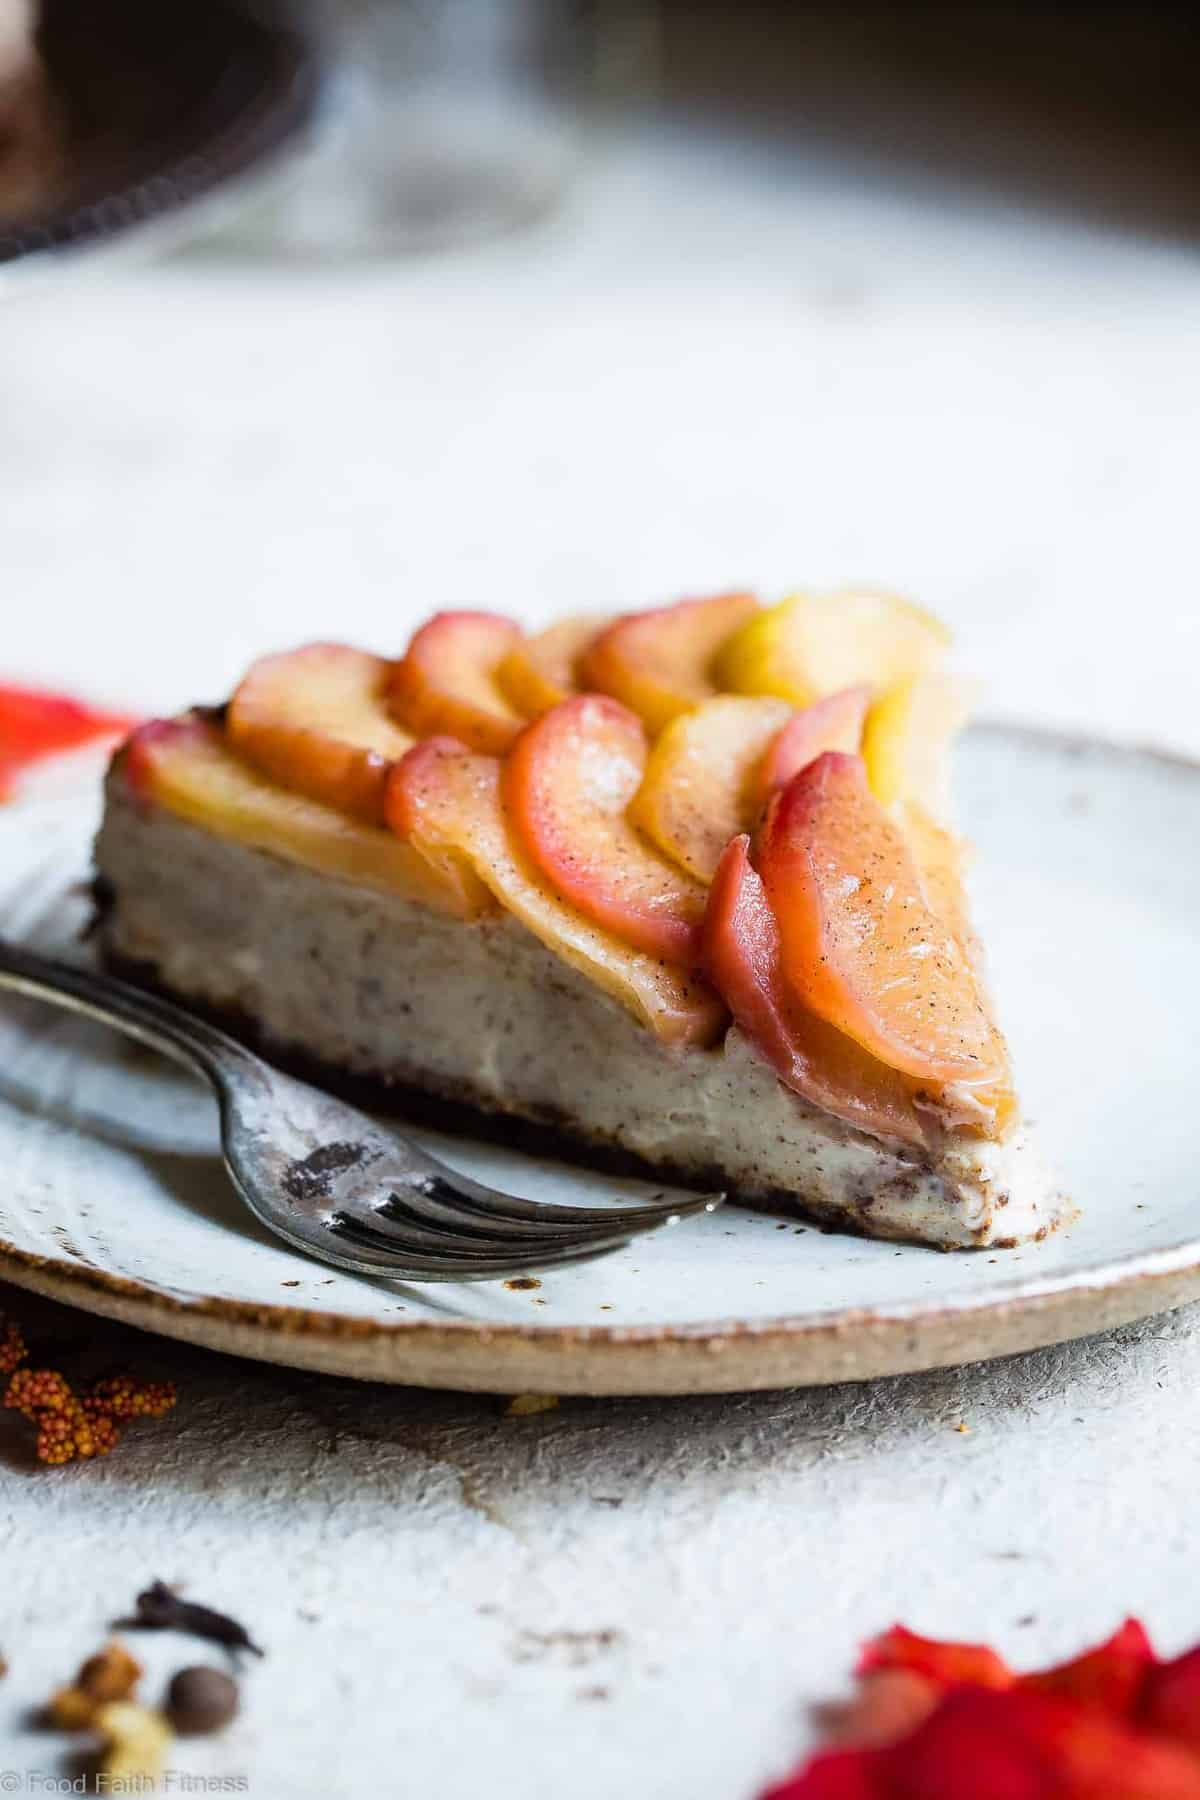 Honey Apple Goat Cheese Cheesecake - This creamy cheesecake is topped with cinnamon honey apples and is perfectly sweet and a little bit tangy! Gluten free, grain free and made with Greek yogurt to keep it light! My husband said it's the best dessert he has ever had! | #Foodfaithfitness | #Glutenfree #Cheesecake #Grainfree #Healthy #Goatcheese